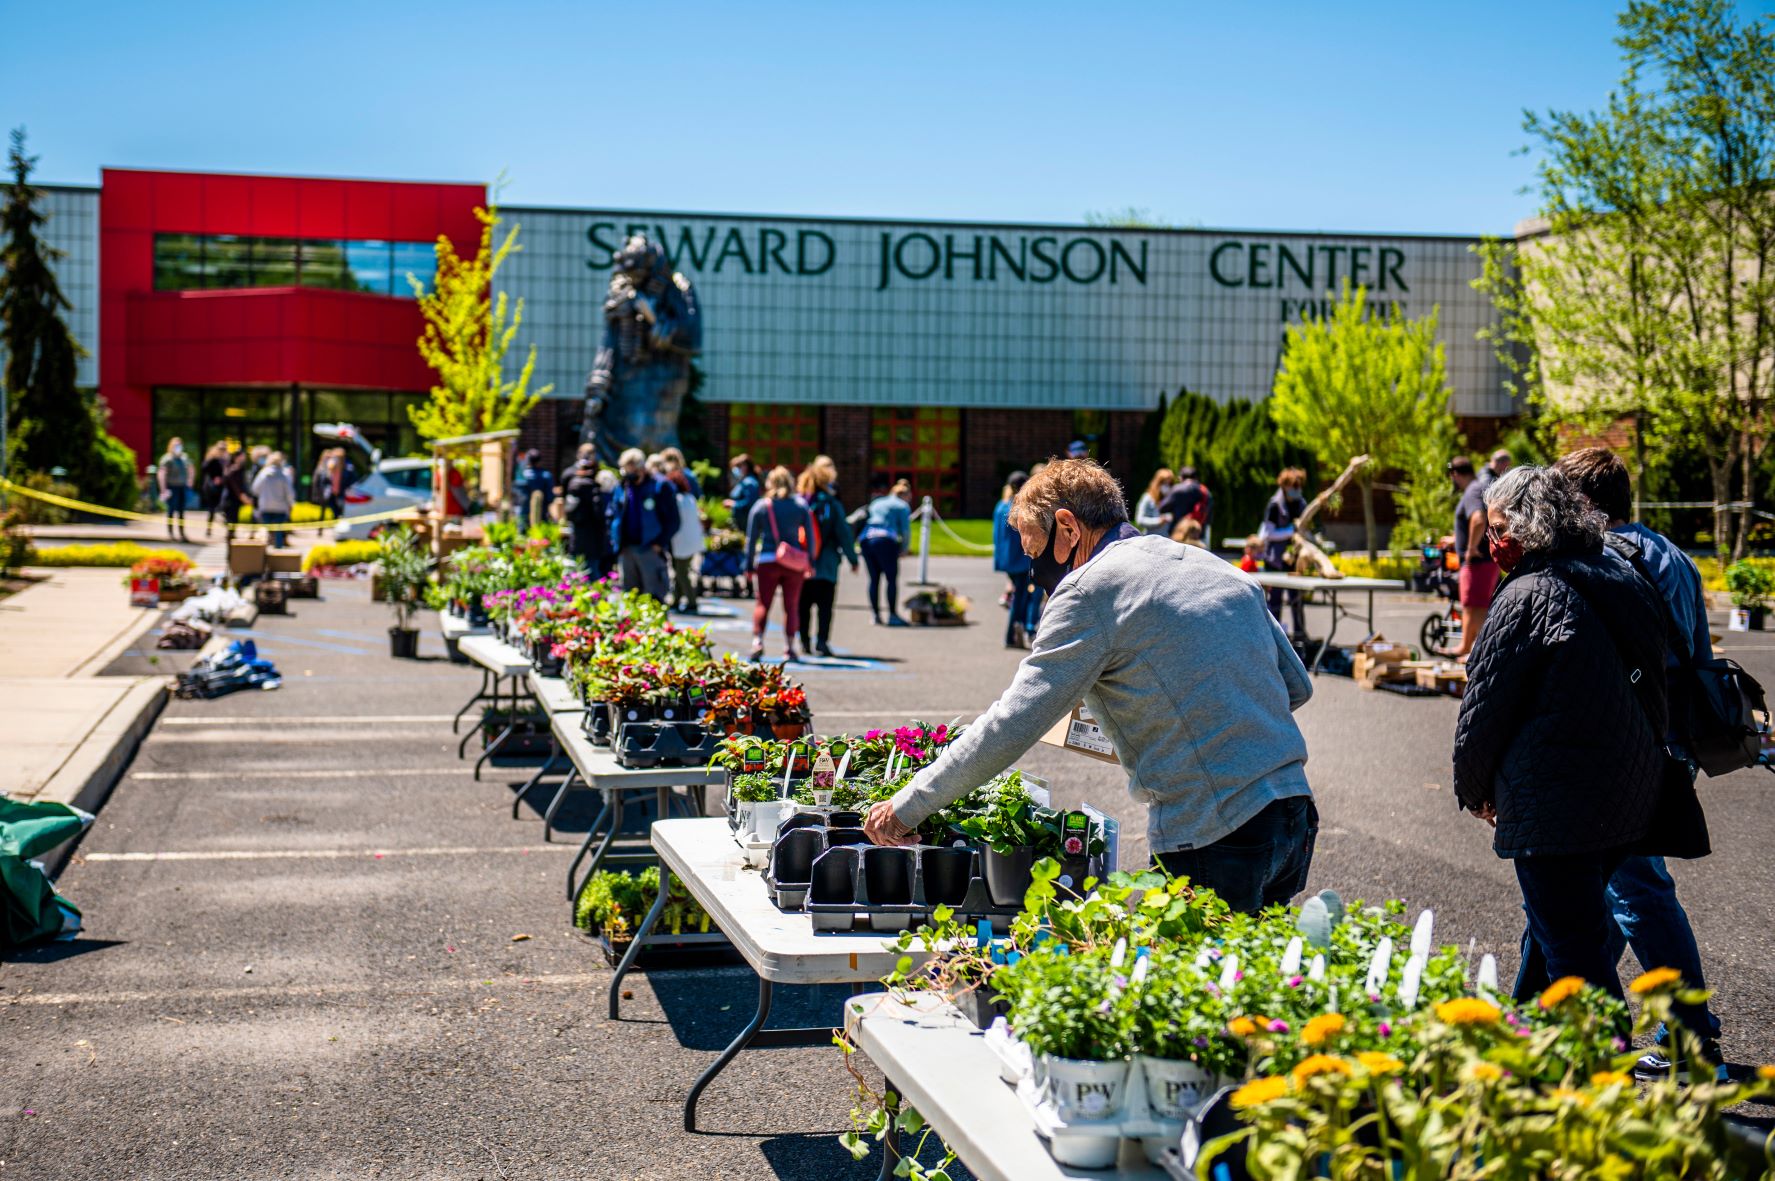 FROM OUR GROUNDS TO YOURS: GFS PLANT SALE 2